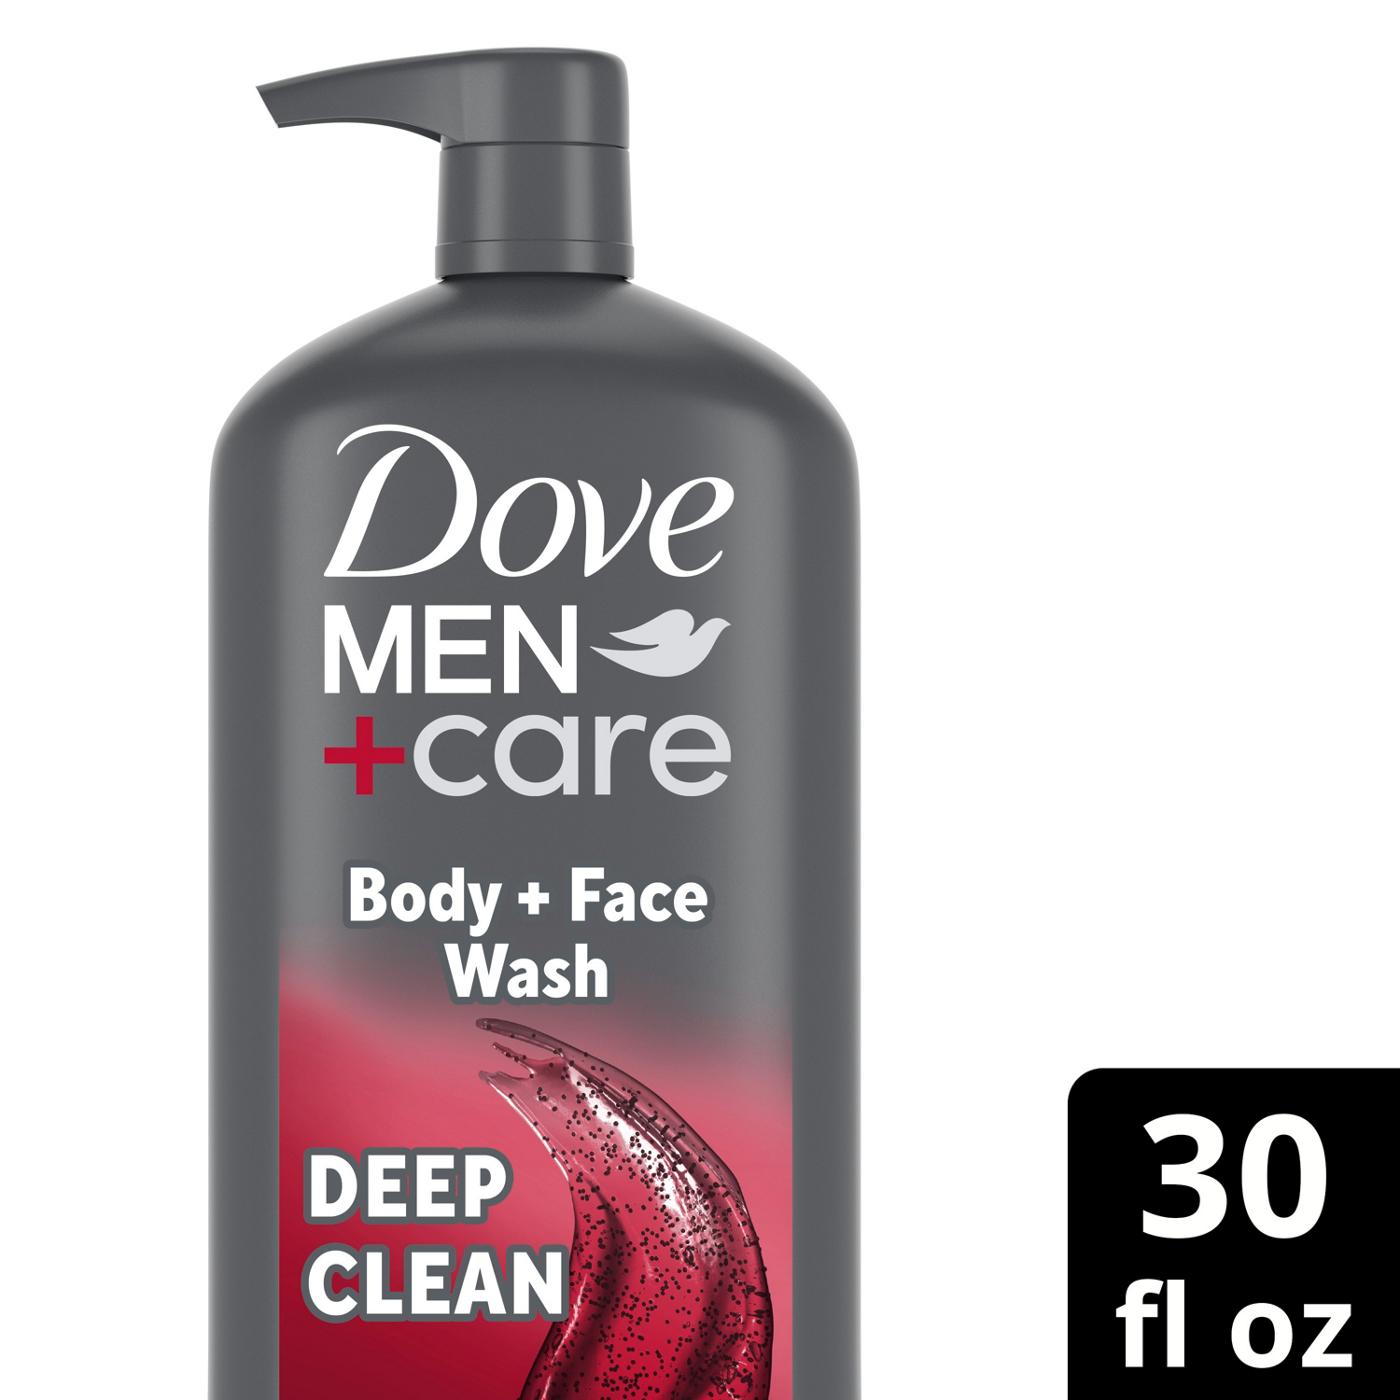 Dove Men+Care Exfoliating Deep Clean Body + Face Wash ; image 5 of 5